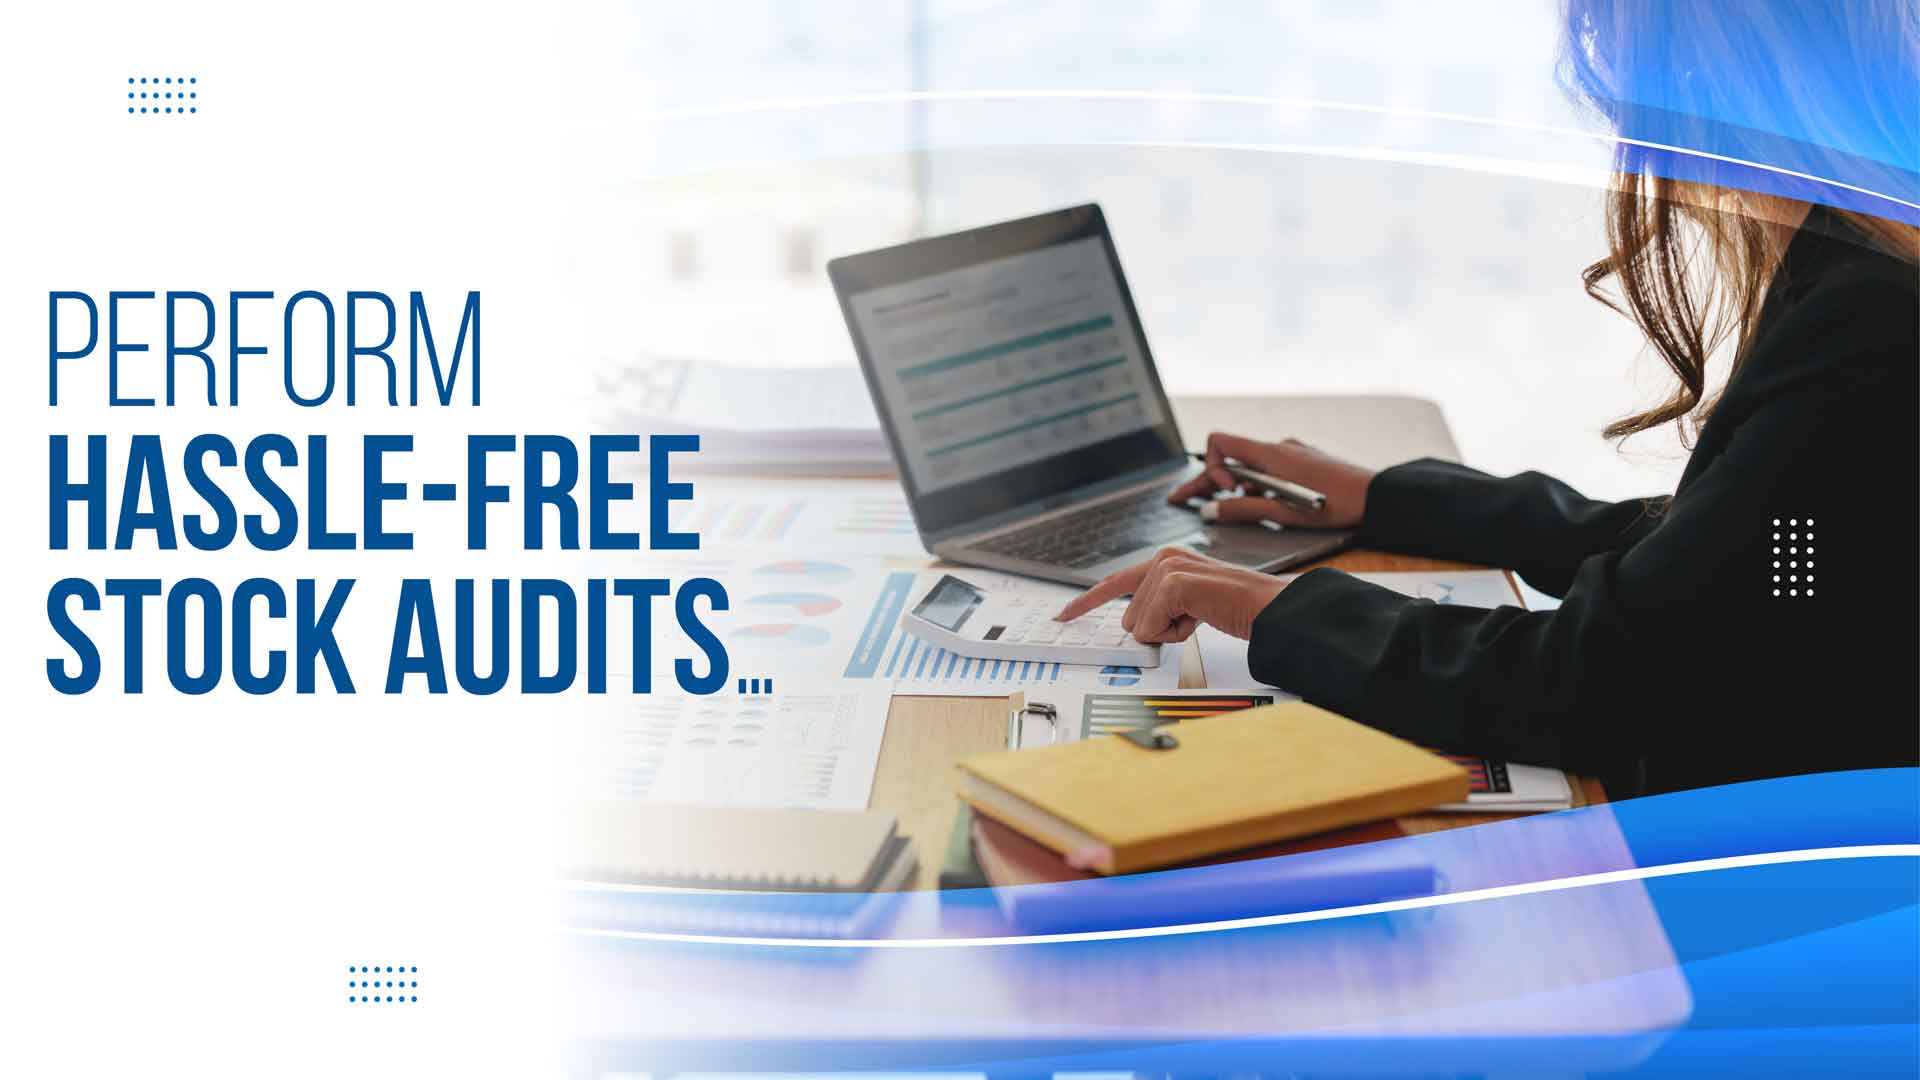 Perform Hassle-free stock audits…